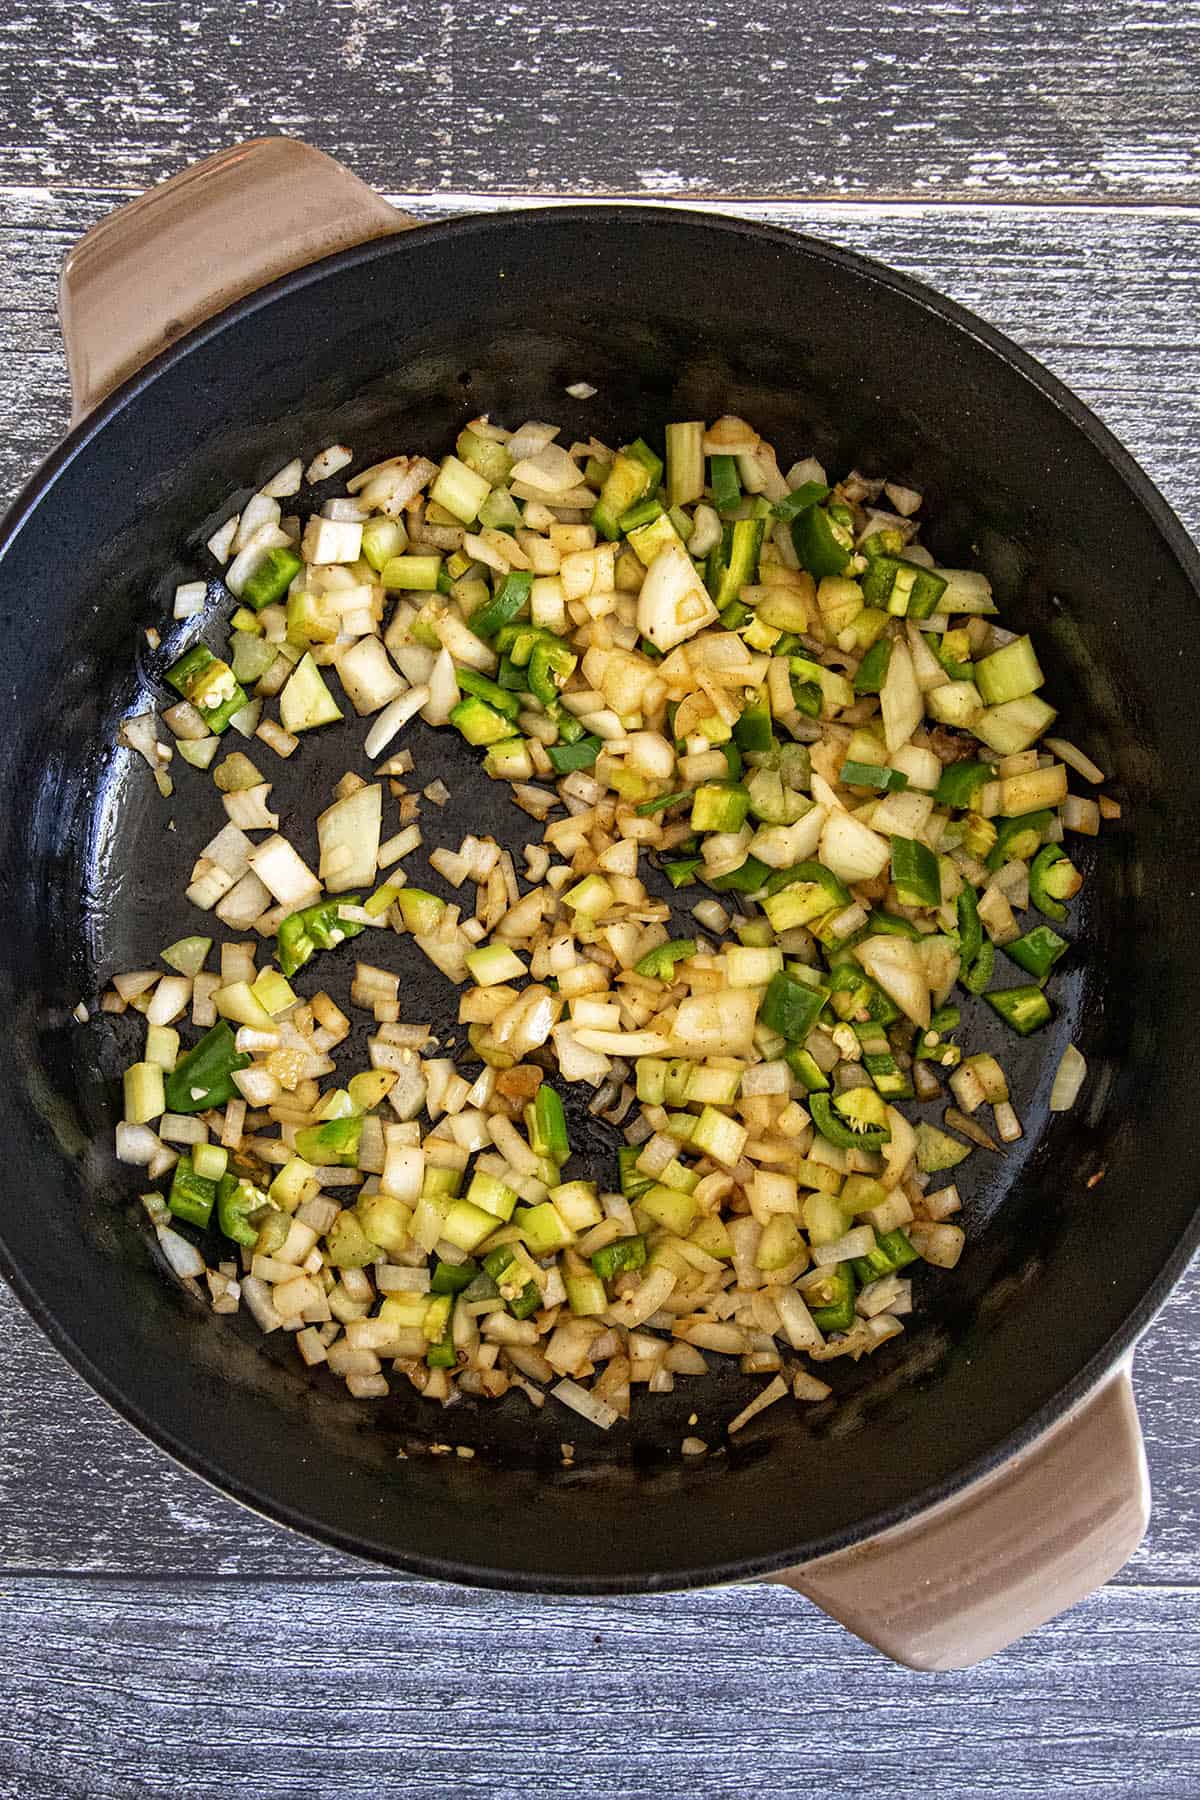 Cooking down vegetables in a pot to make Yakamein